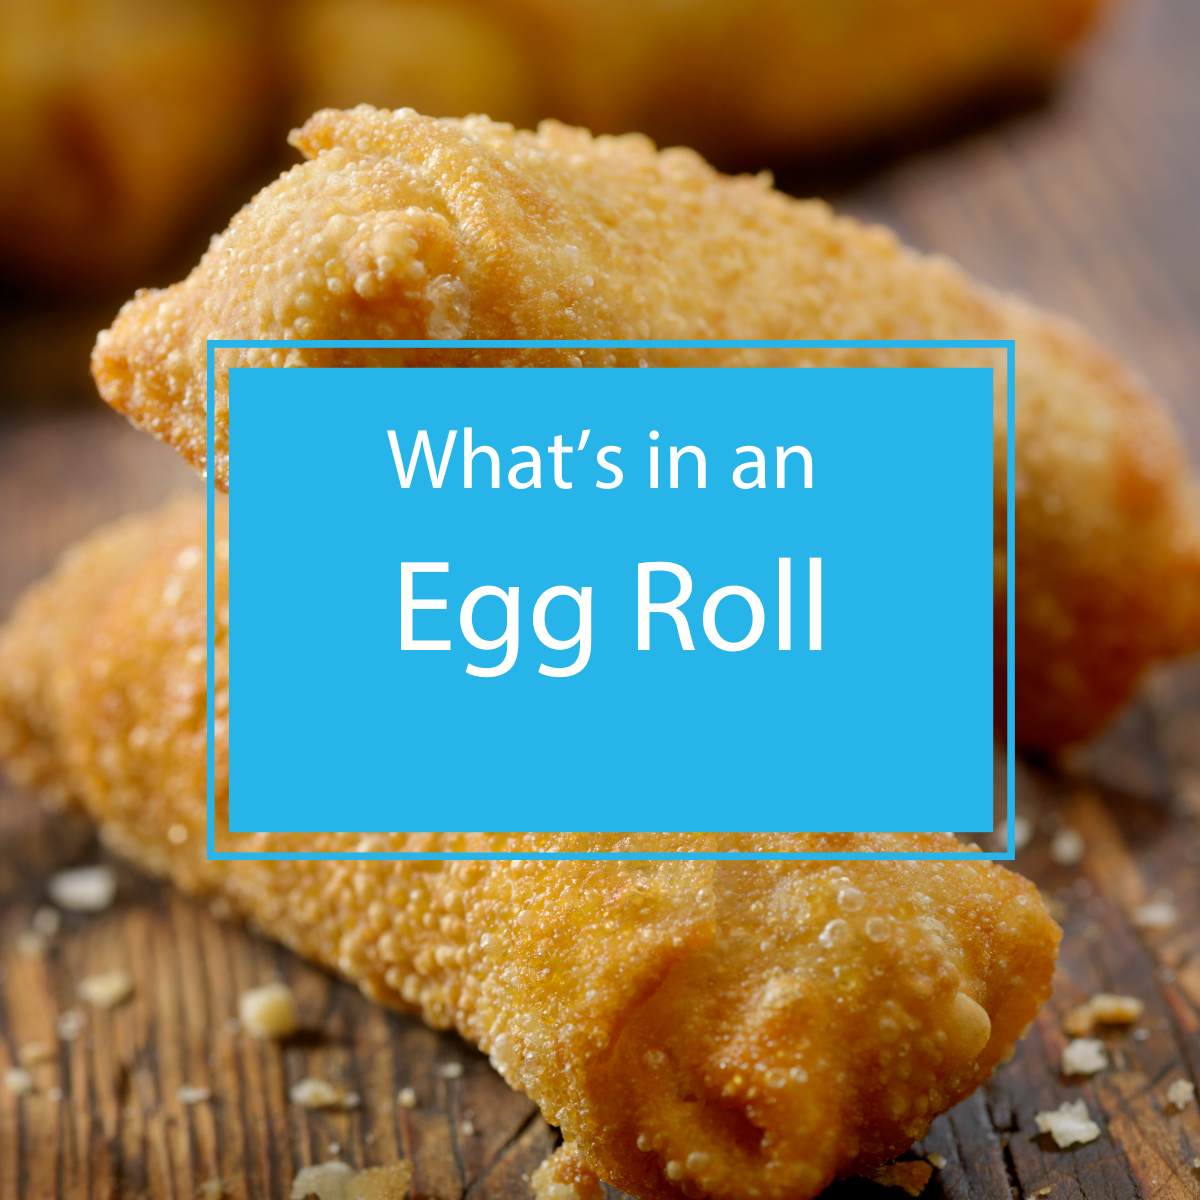 what's in an egg roll